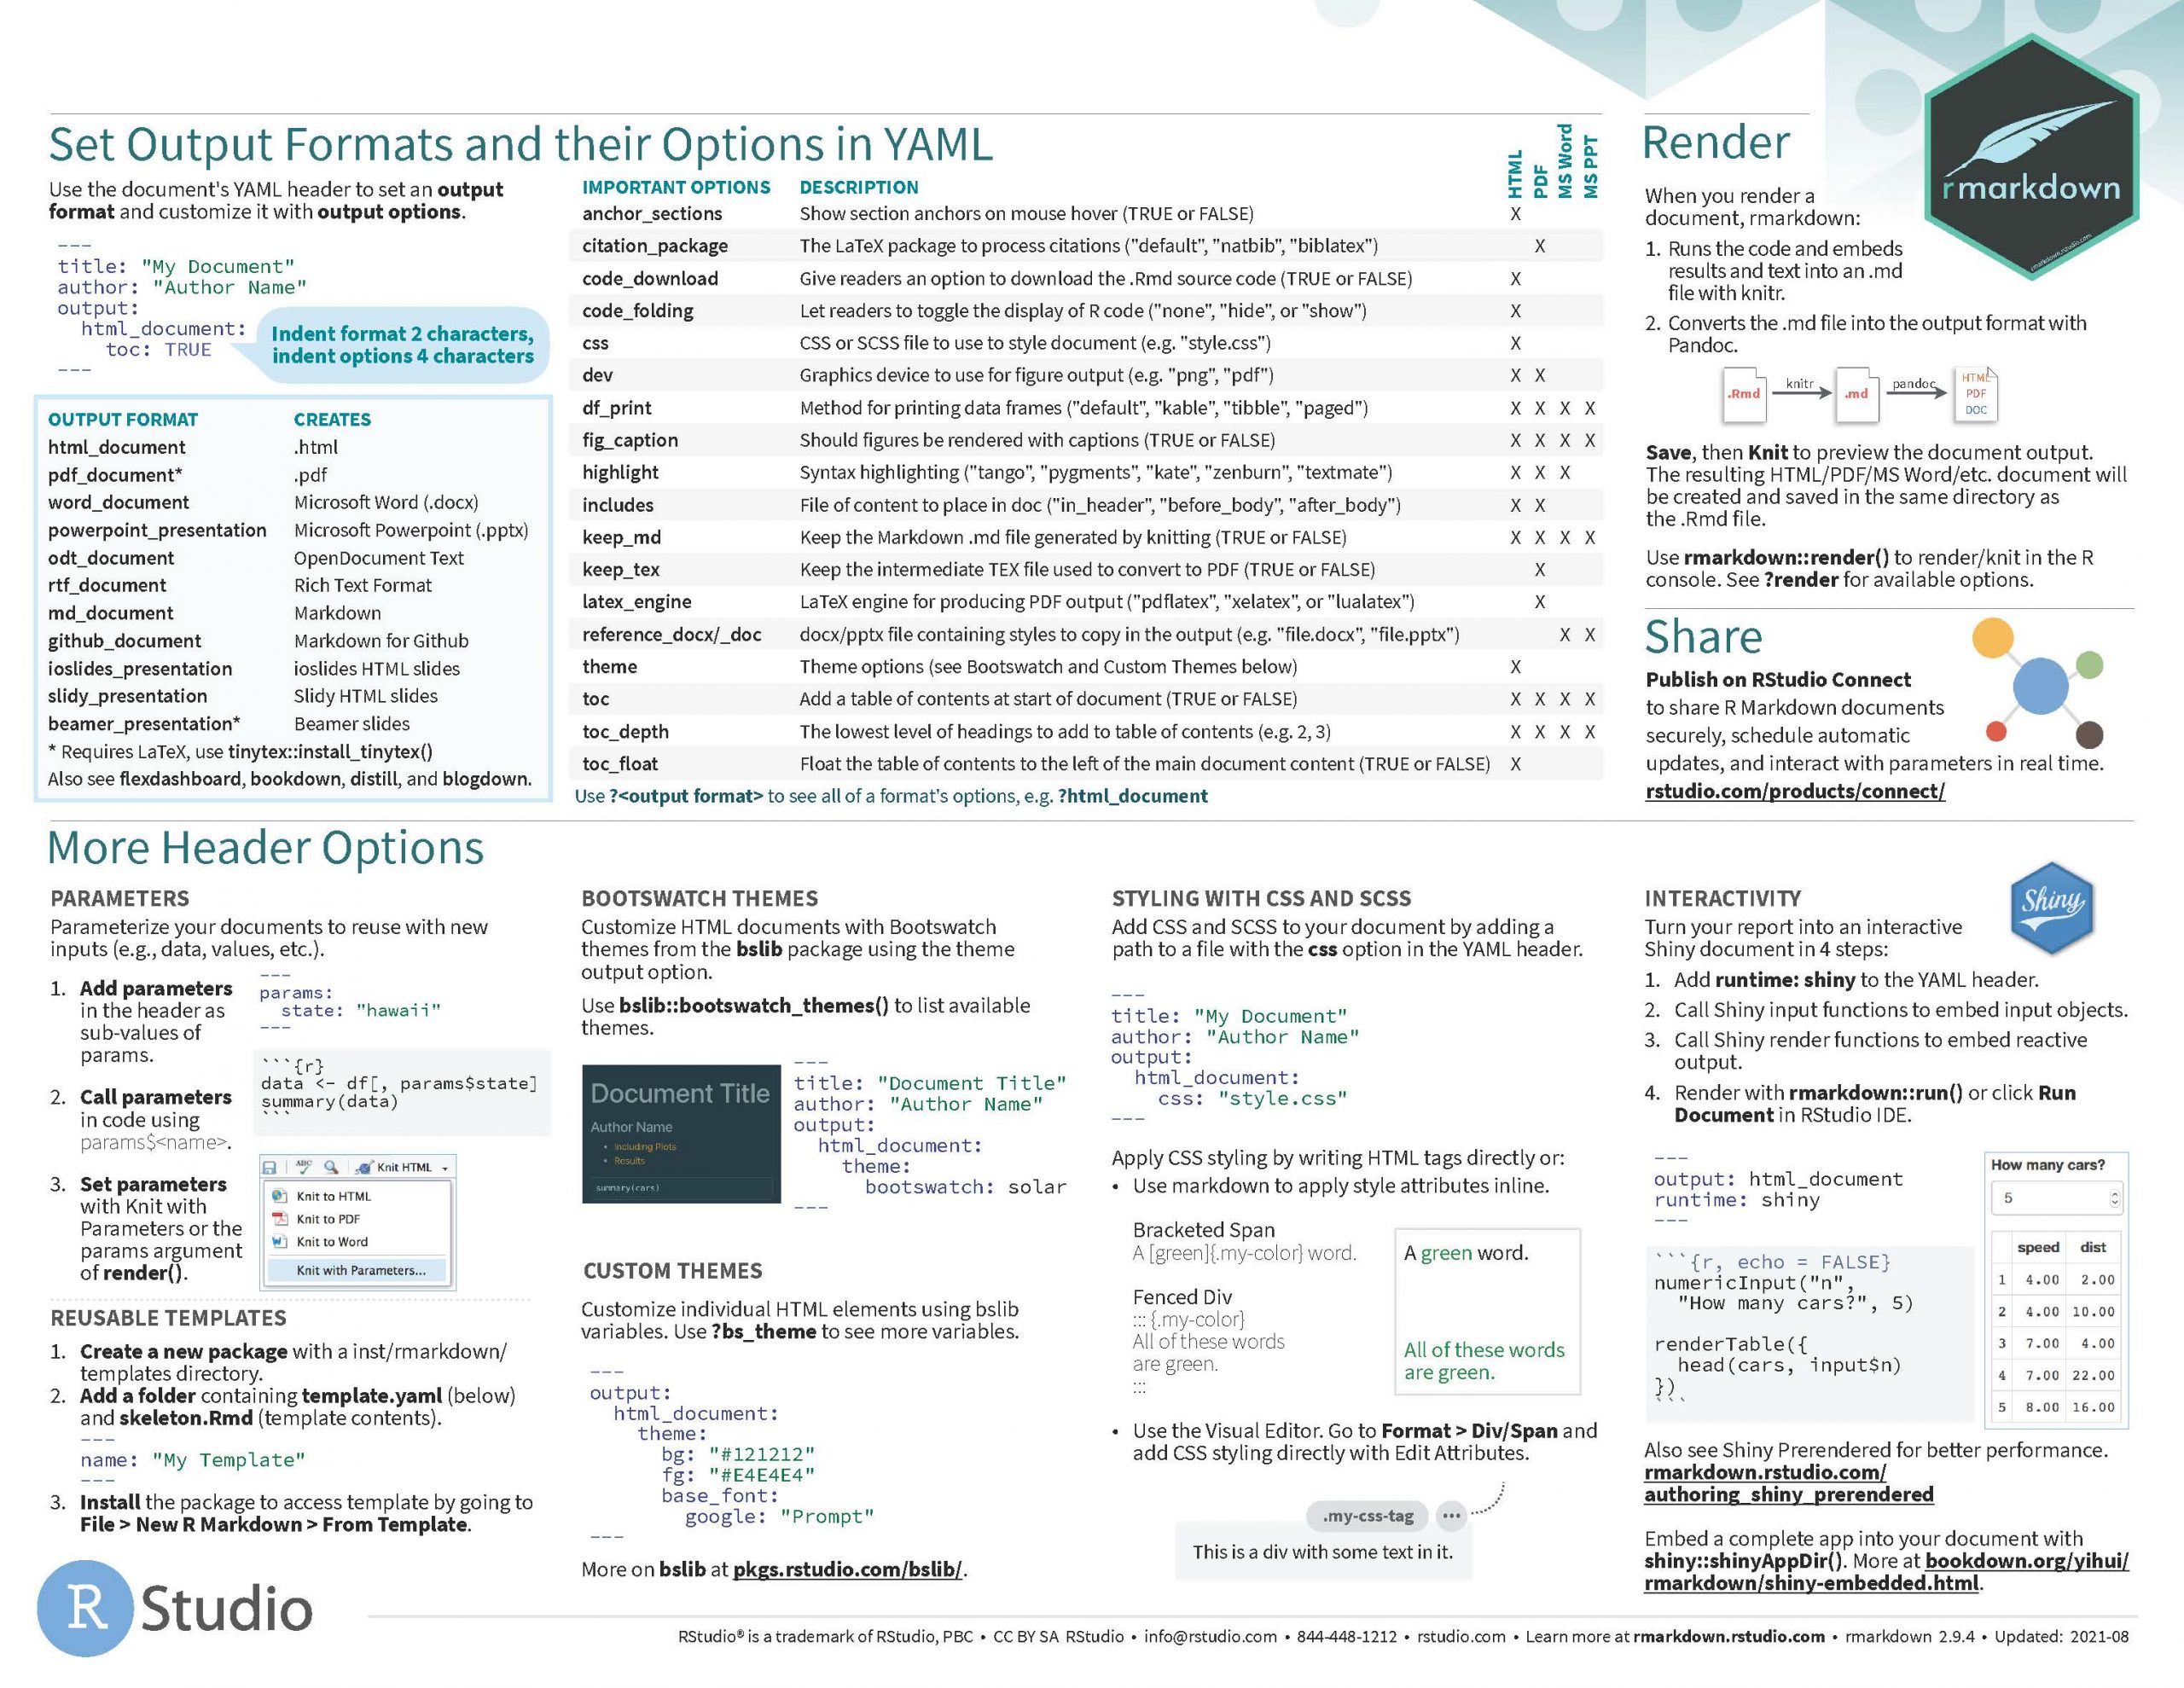 R Markdown cheatsheet page 2 with key options and commands